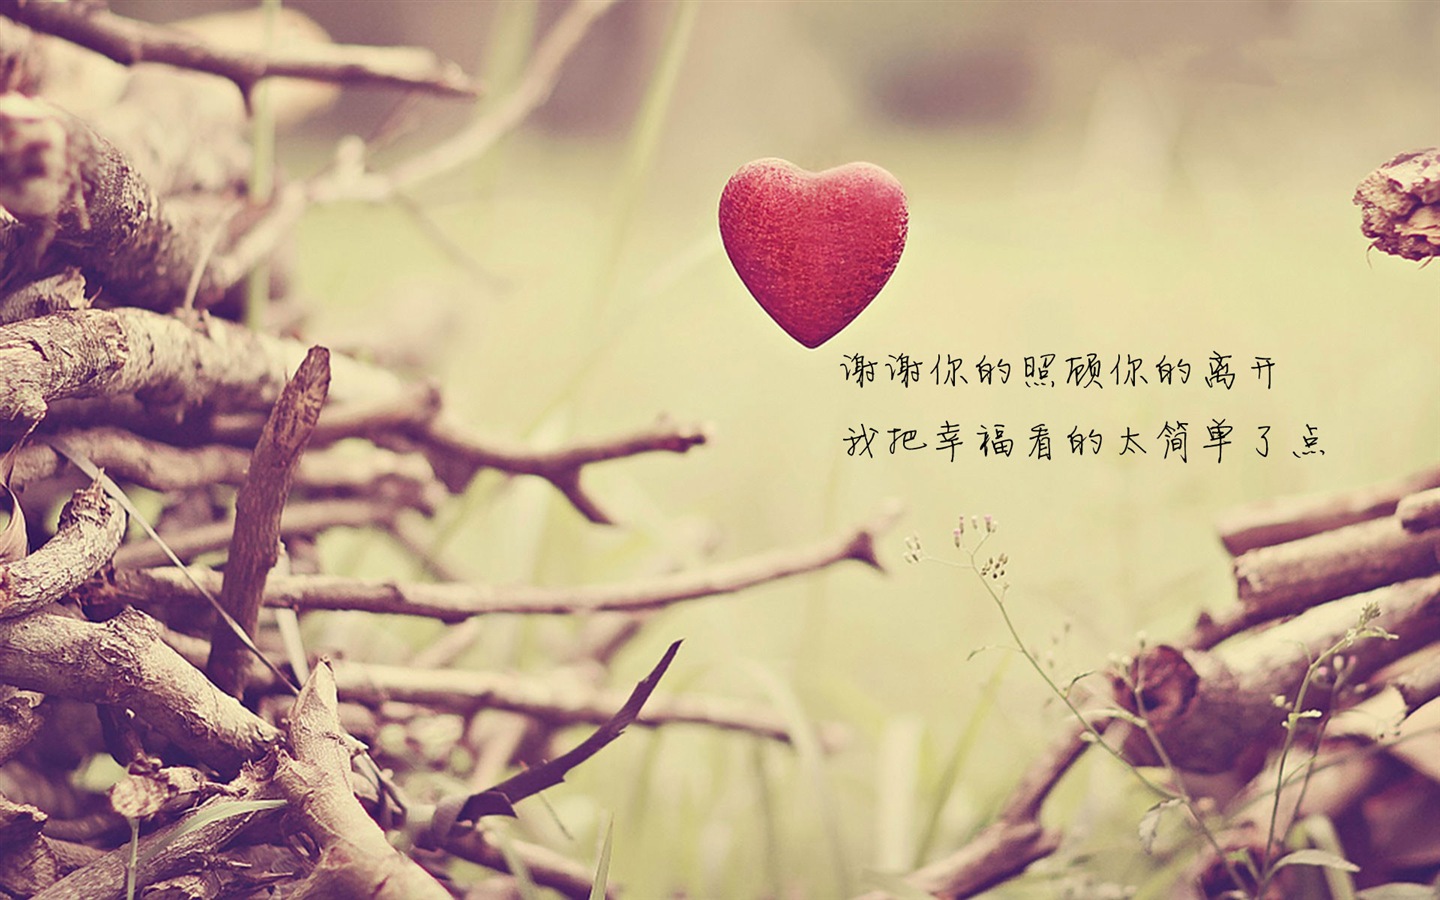 The theme of love, creative heart-shaped HD wallpapers #7 - 1440x900